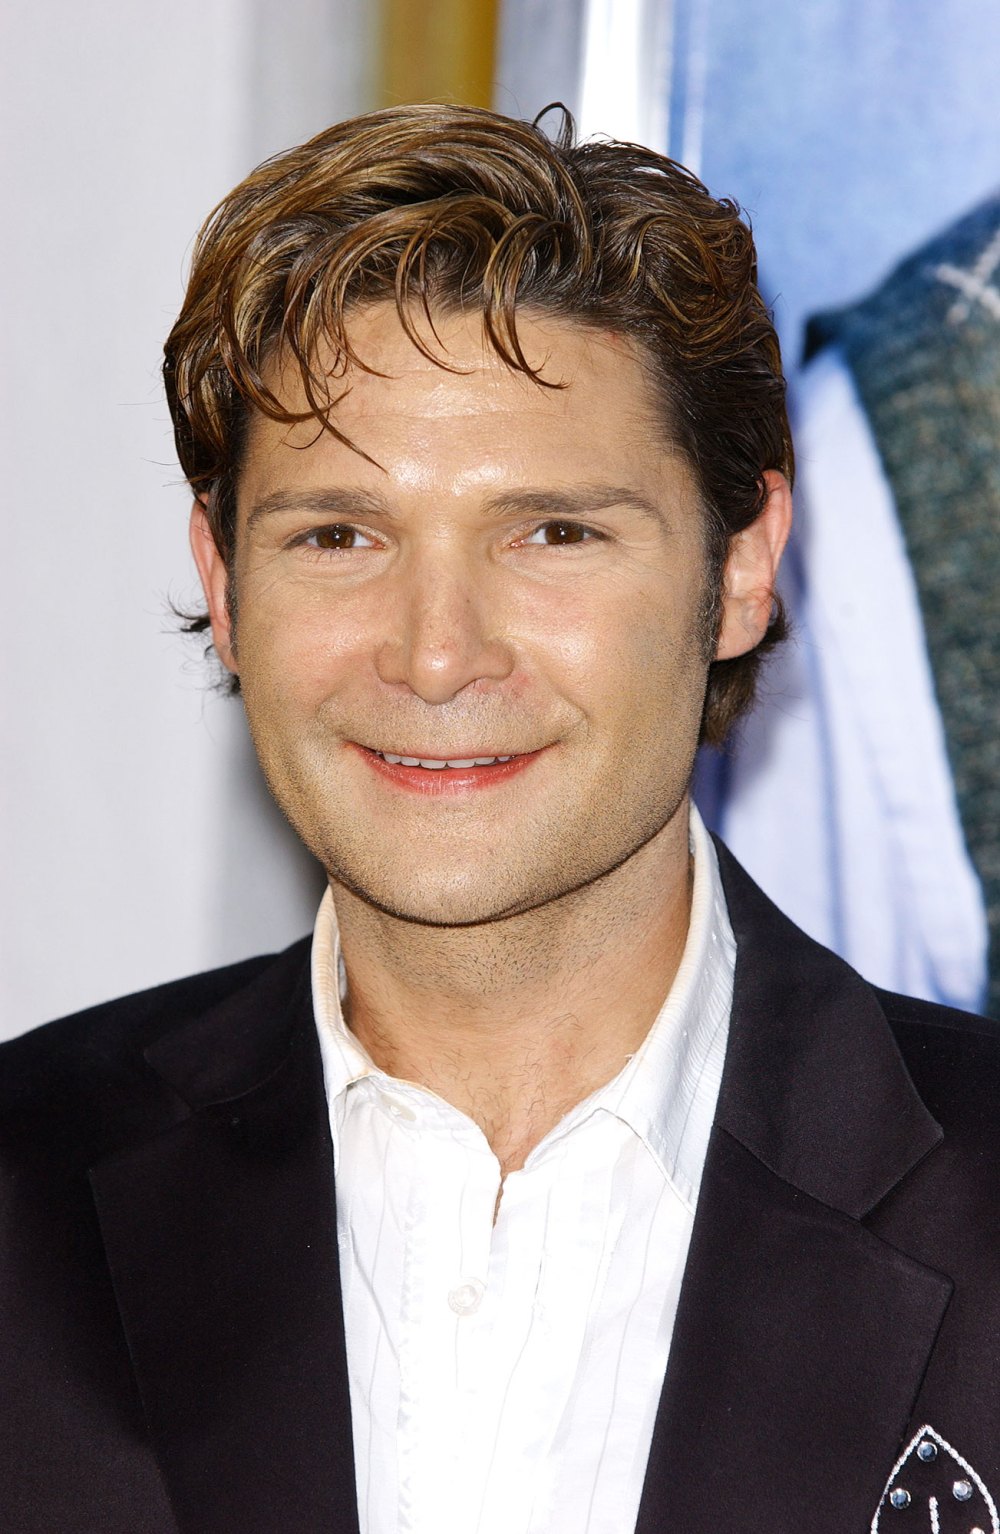 Corey Feldman Alleges Abuse of Child Stars by Hollywood Pedophiles: ‘I Would Love to Name Names’